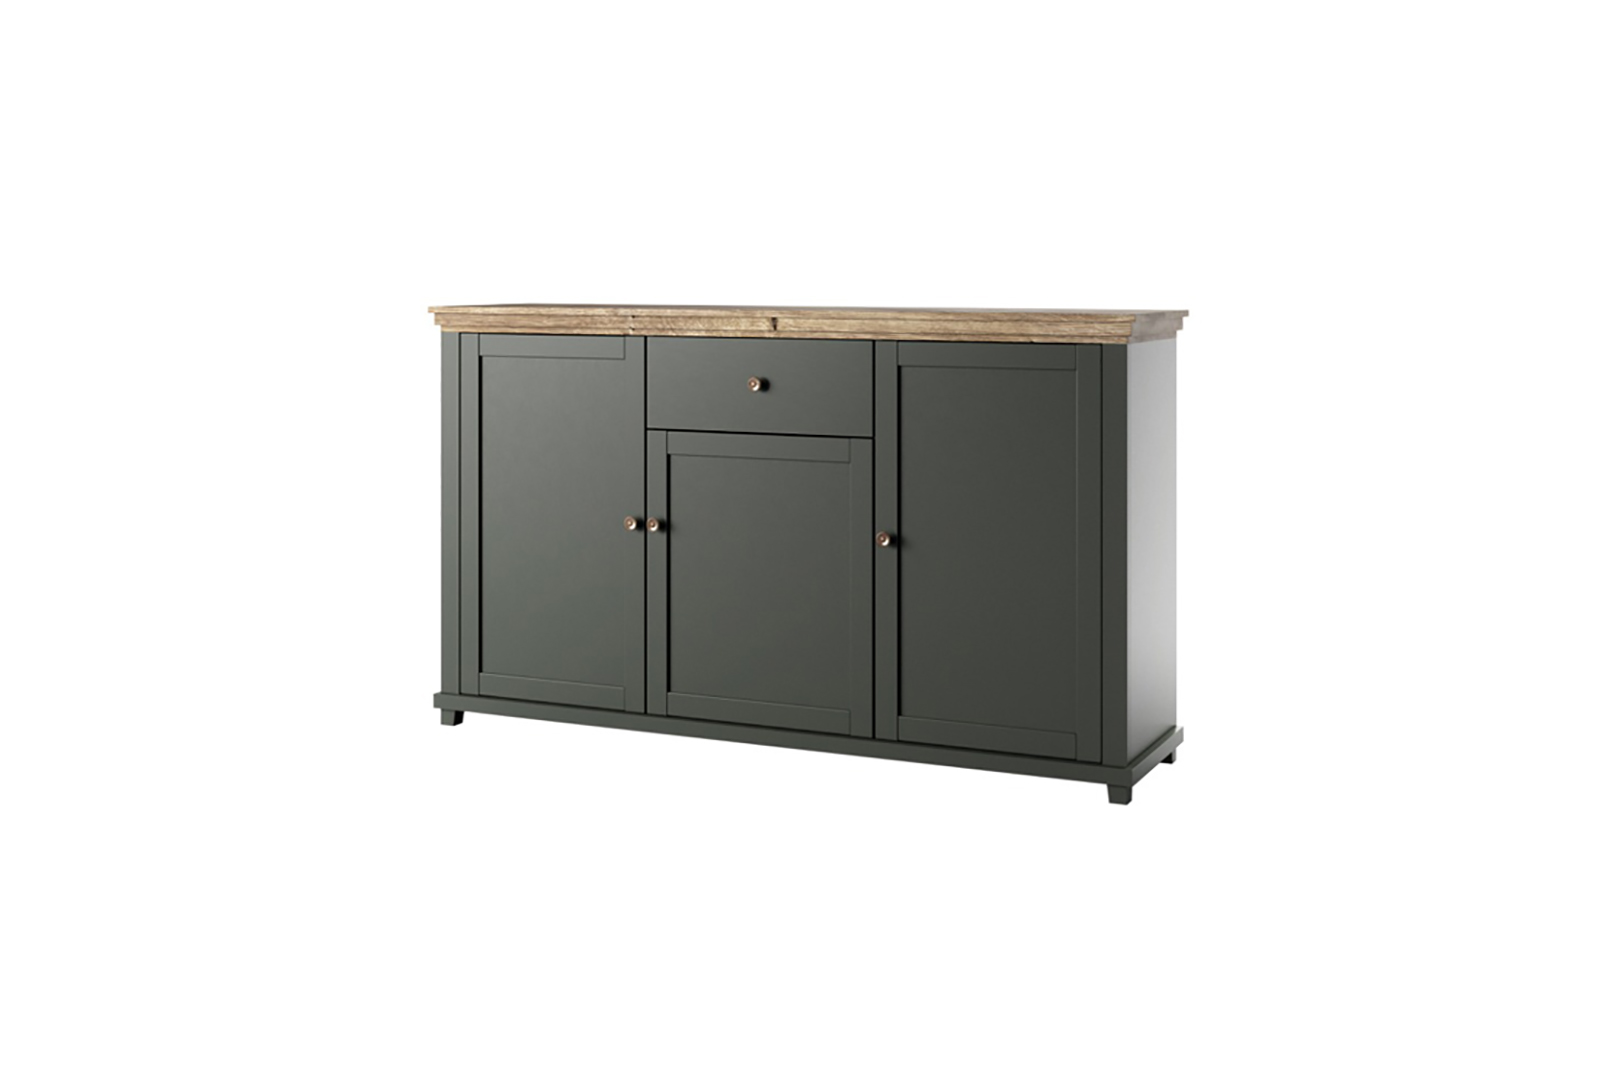 EVORA CHEST OF DRAWERS TYPE 47